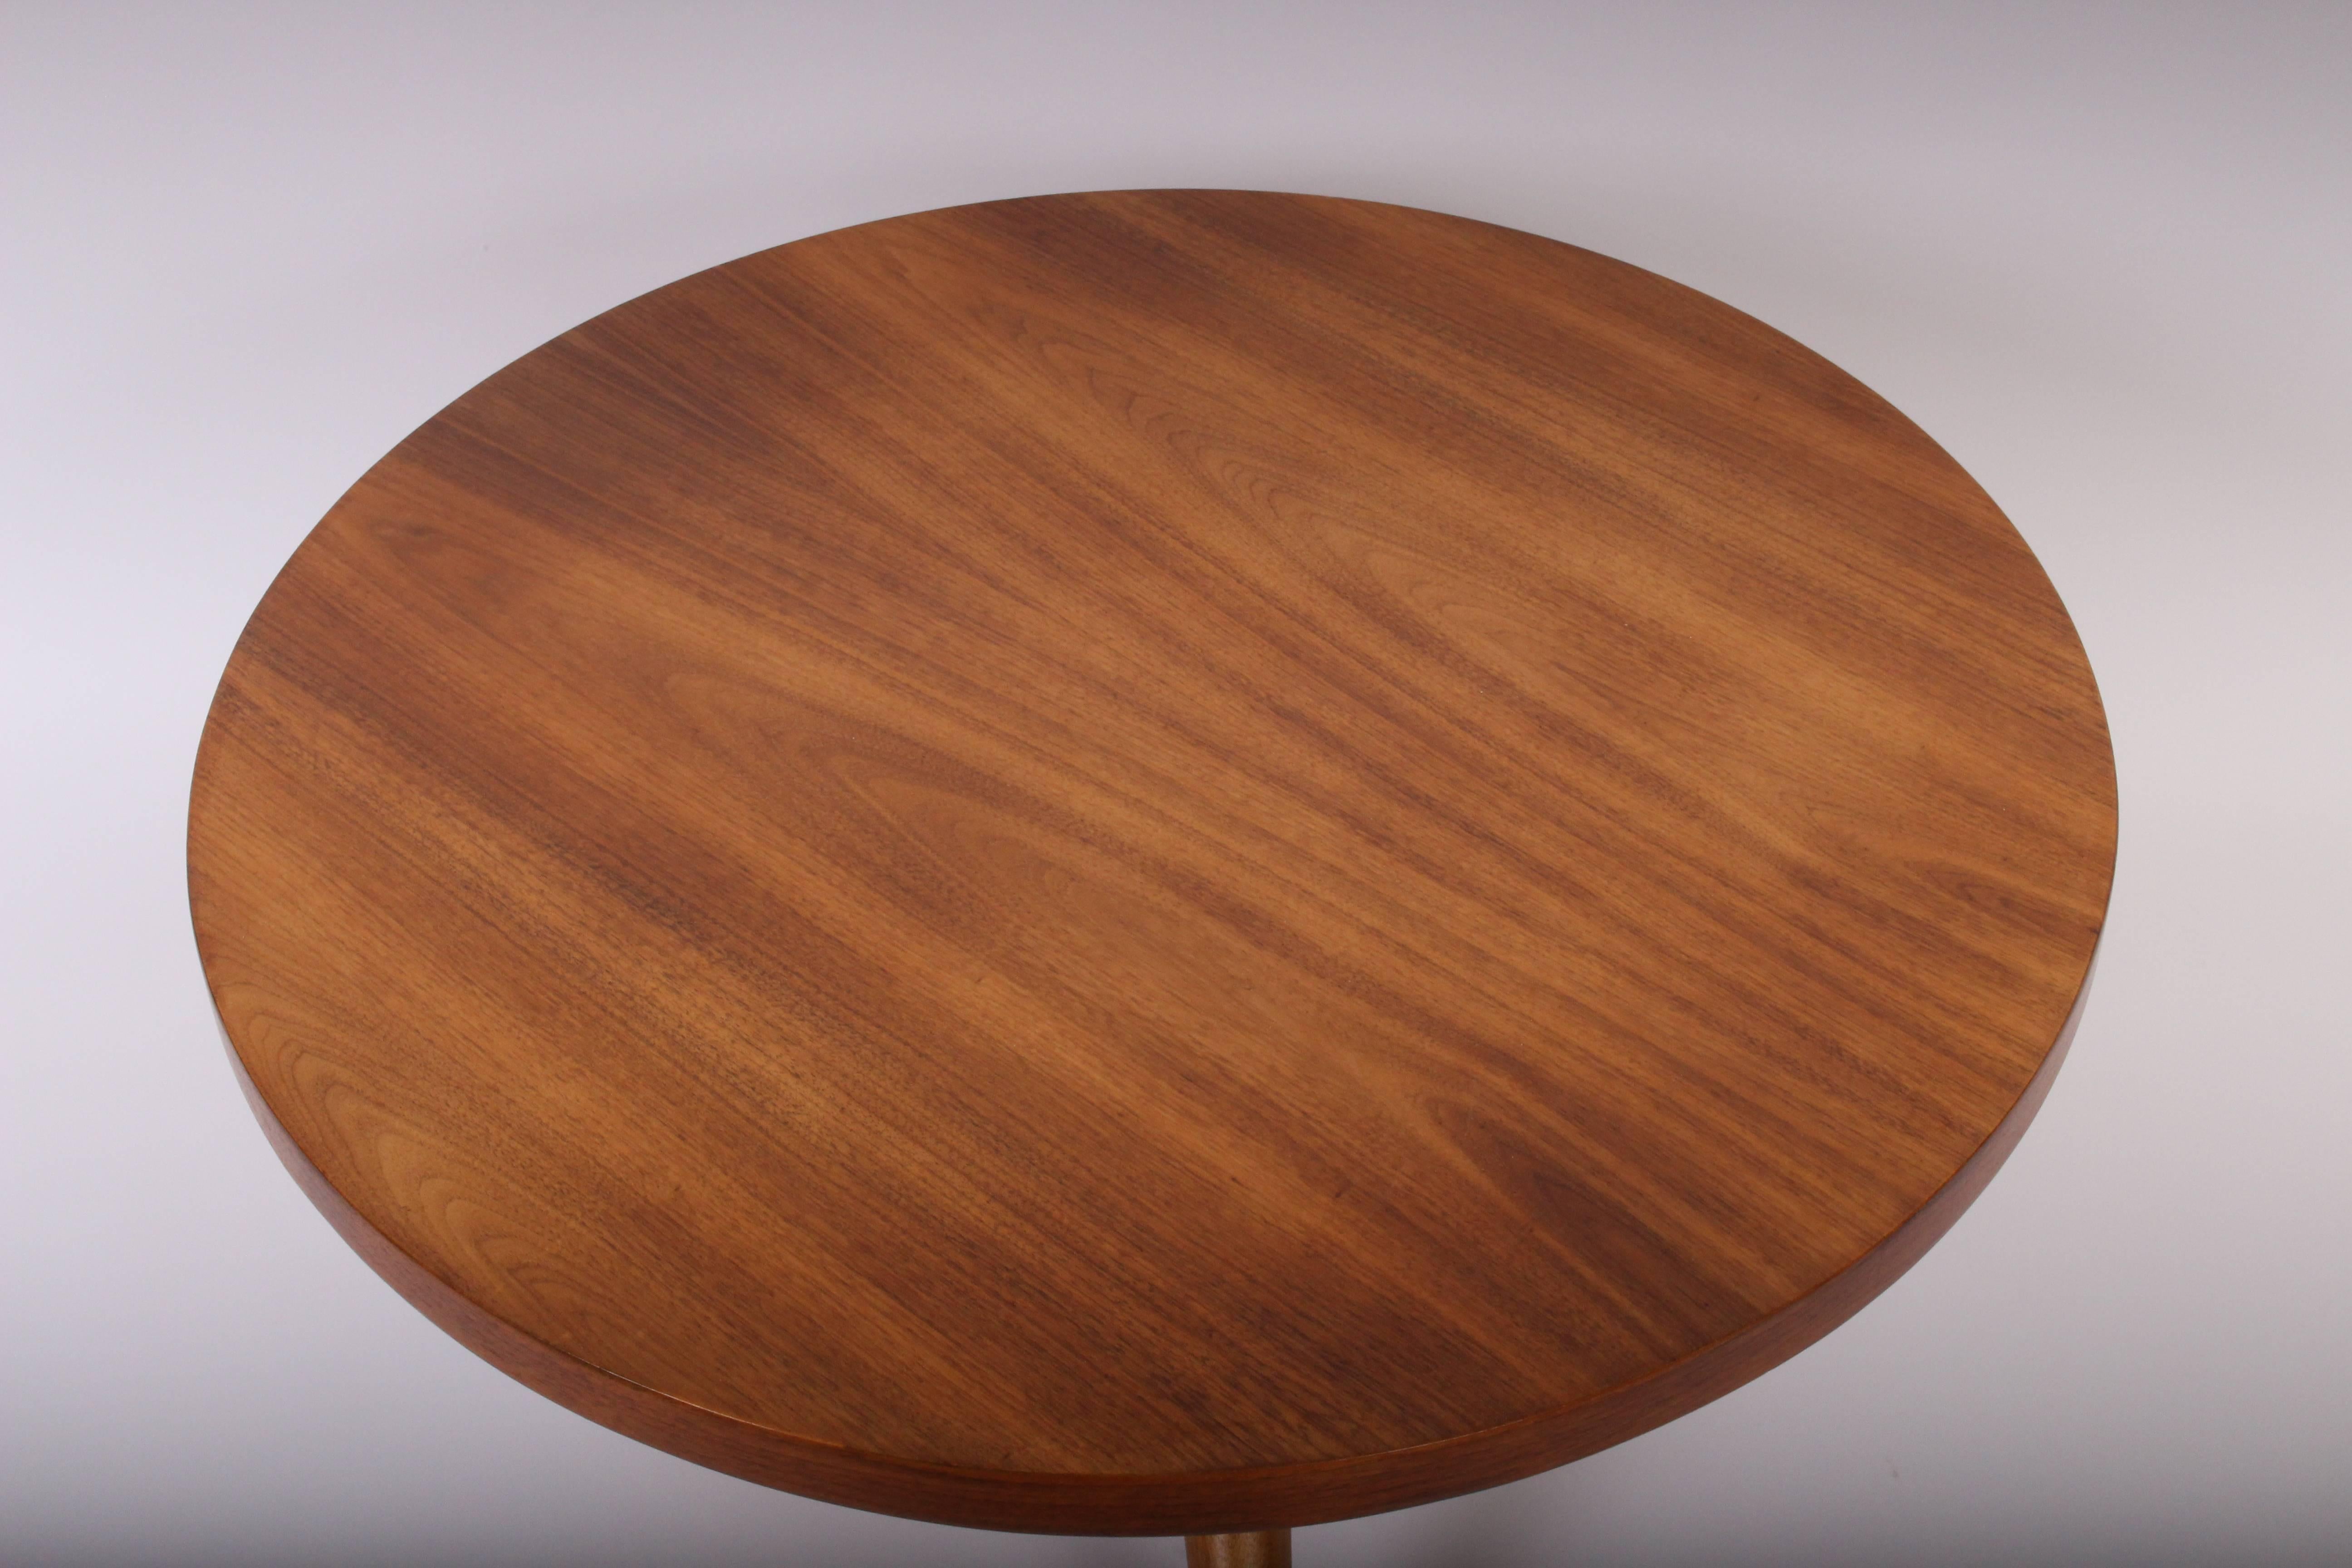 Classic T.H. Robsjohn-Gibbings for Widdicomb Furniture Co. Bleached Walnut Round End Table, Circa 1950. Featuring a circular solid Walnut surface with splayed tripod legs. Versatile. Neutral. Natural. Nightstand. Bedside. Bedroom. Reception. Label